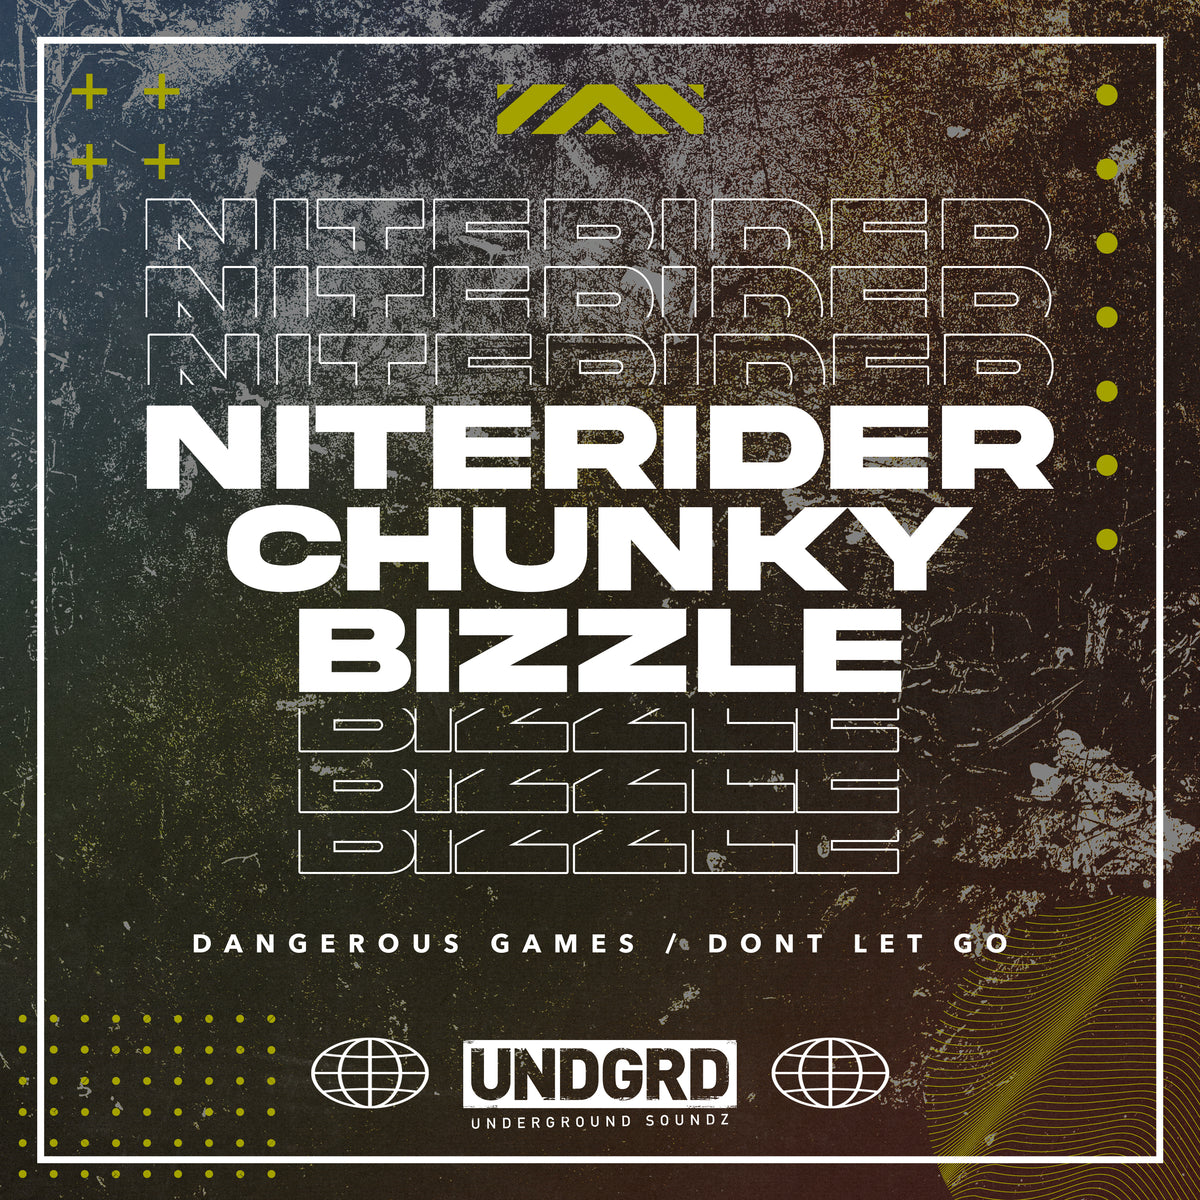 UND 022 - Niterider & Chunky Bizzle 'Dangerous Games' | 'Don't Let Go'